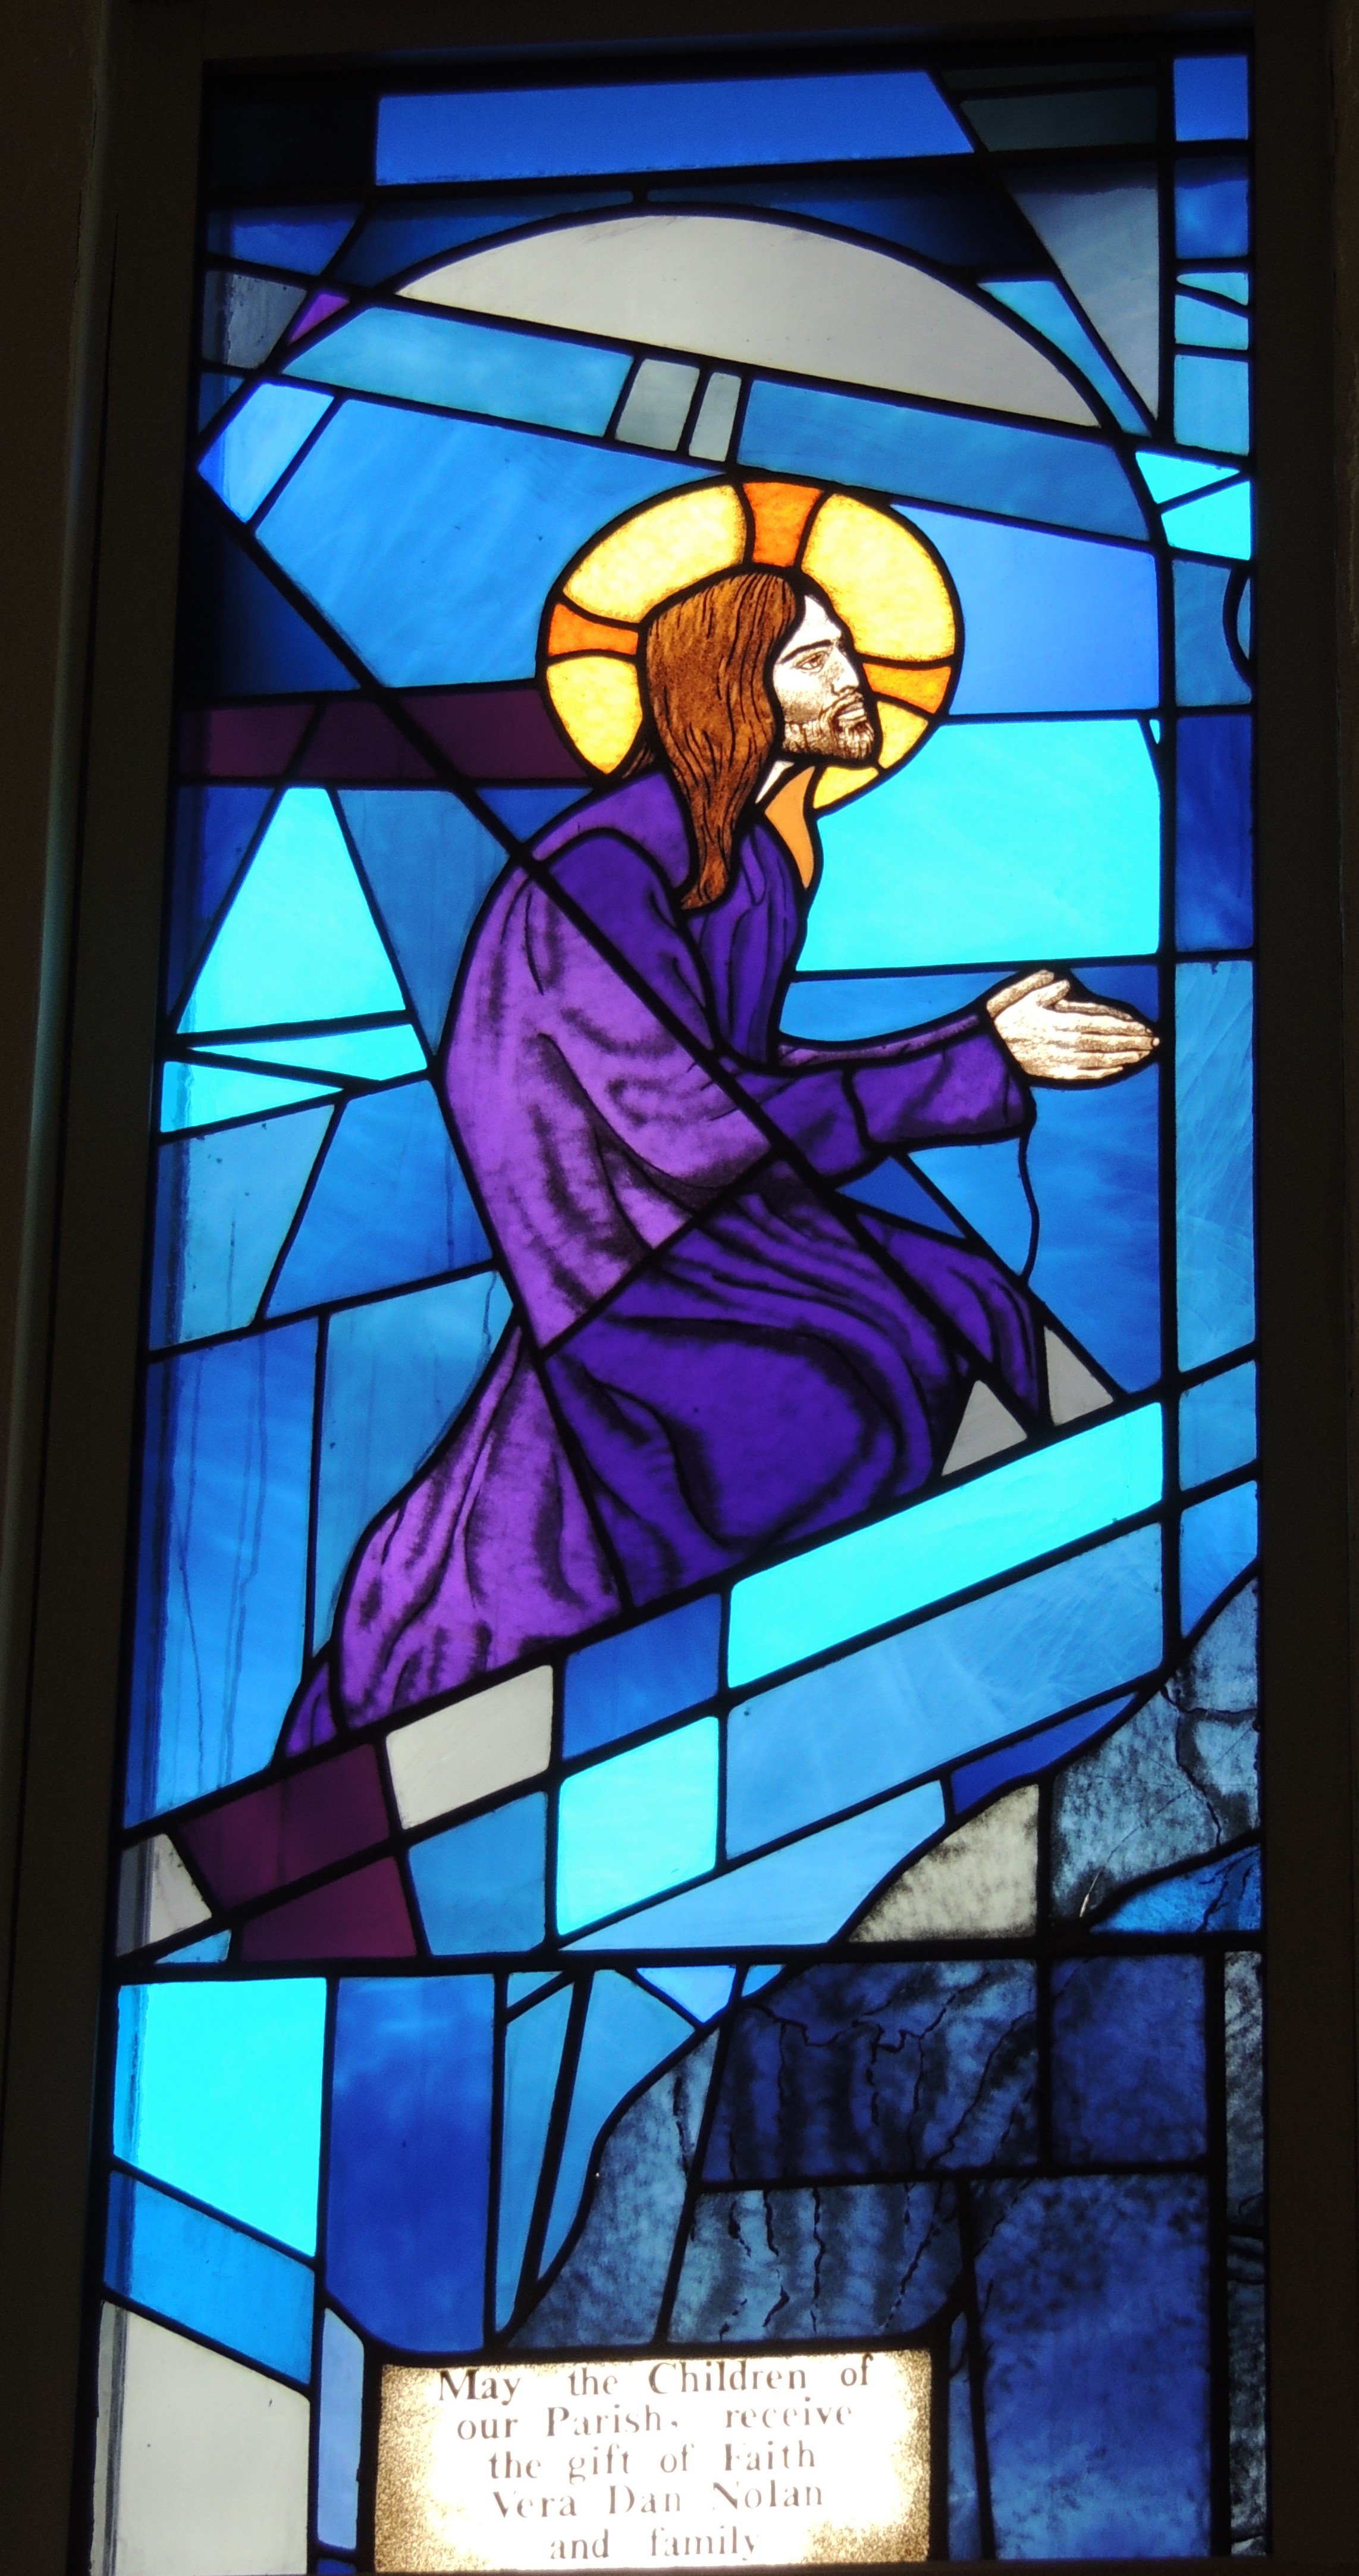 Jesus kneeling and praying - stained glass window